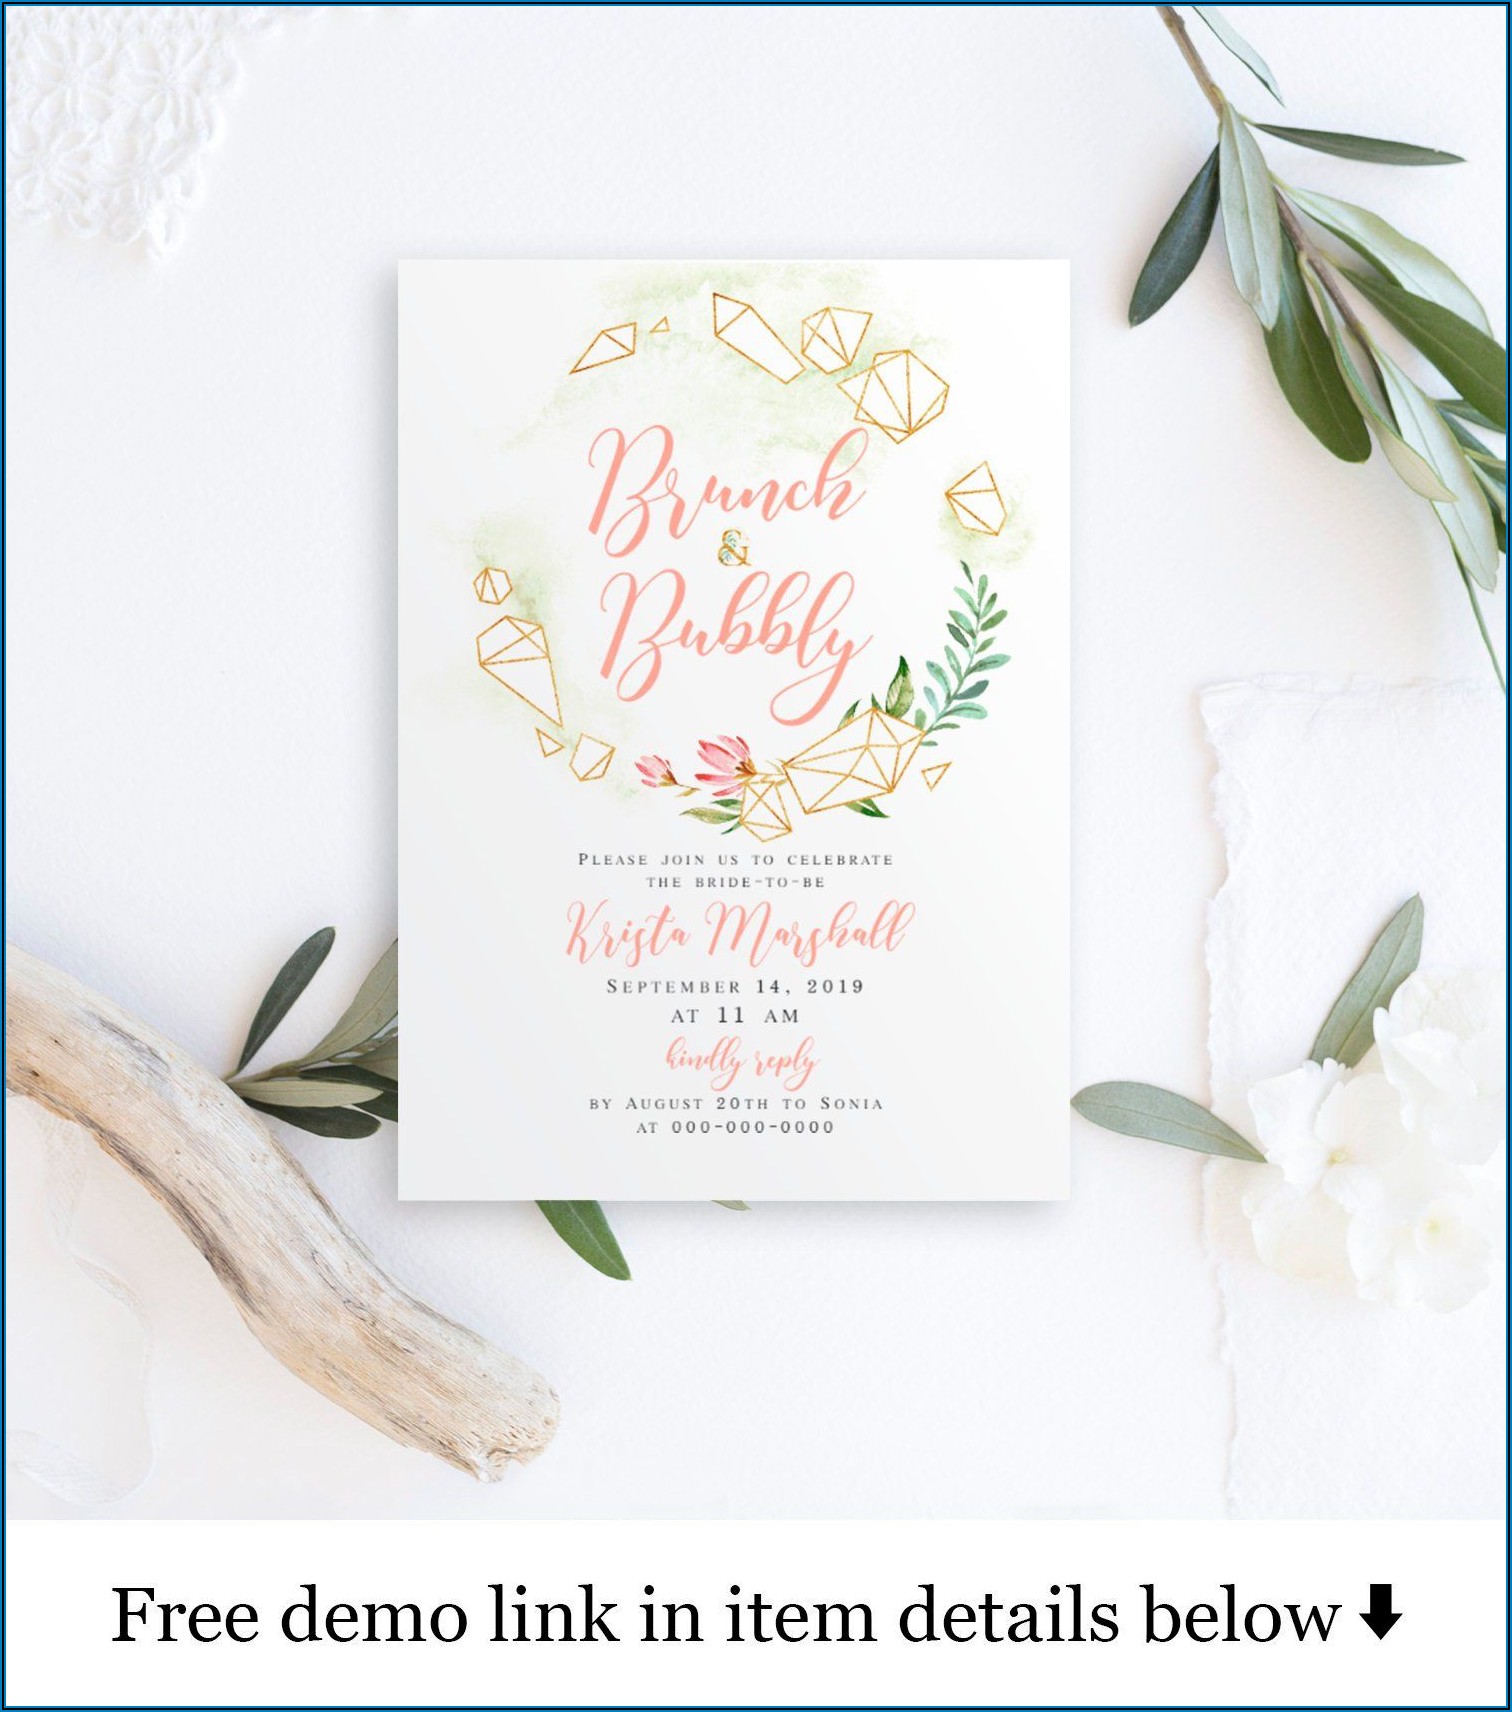 Brunch And Bubbly Invite Template